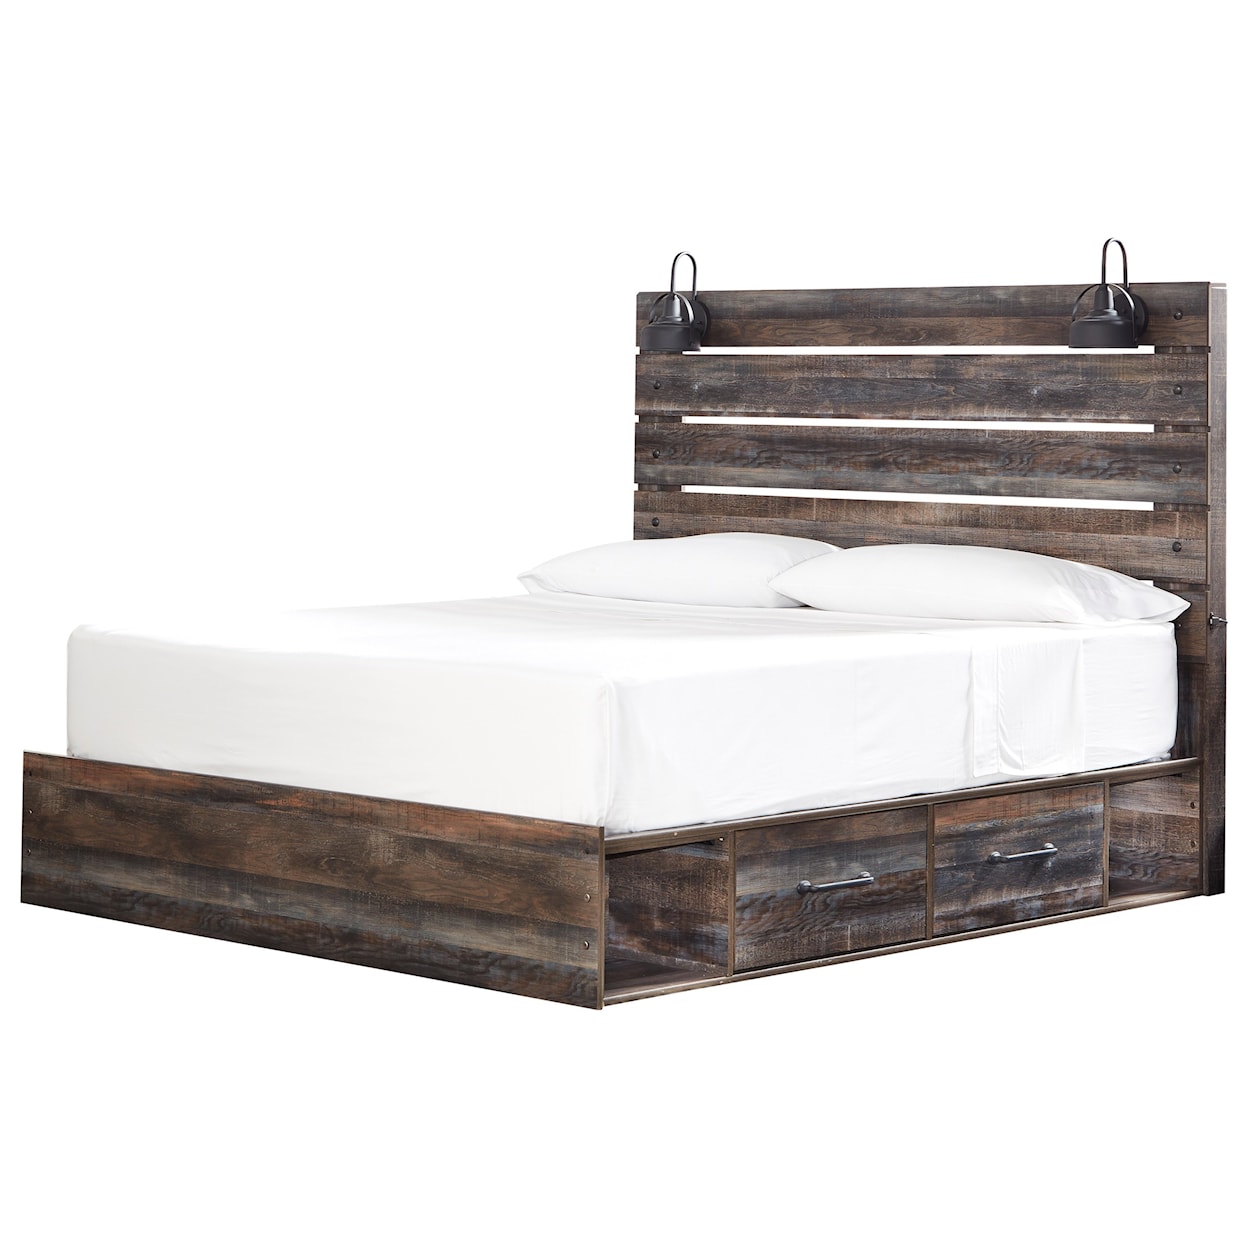 Ashley Signature Design Drystan King Storage Bed with 4 Drawers